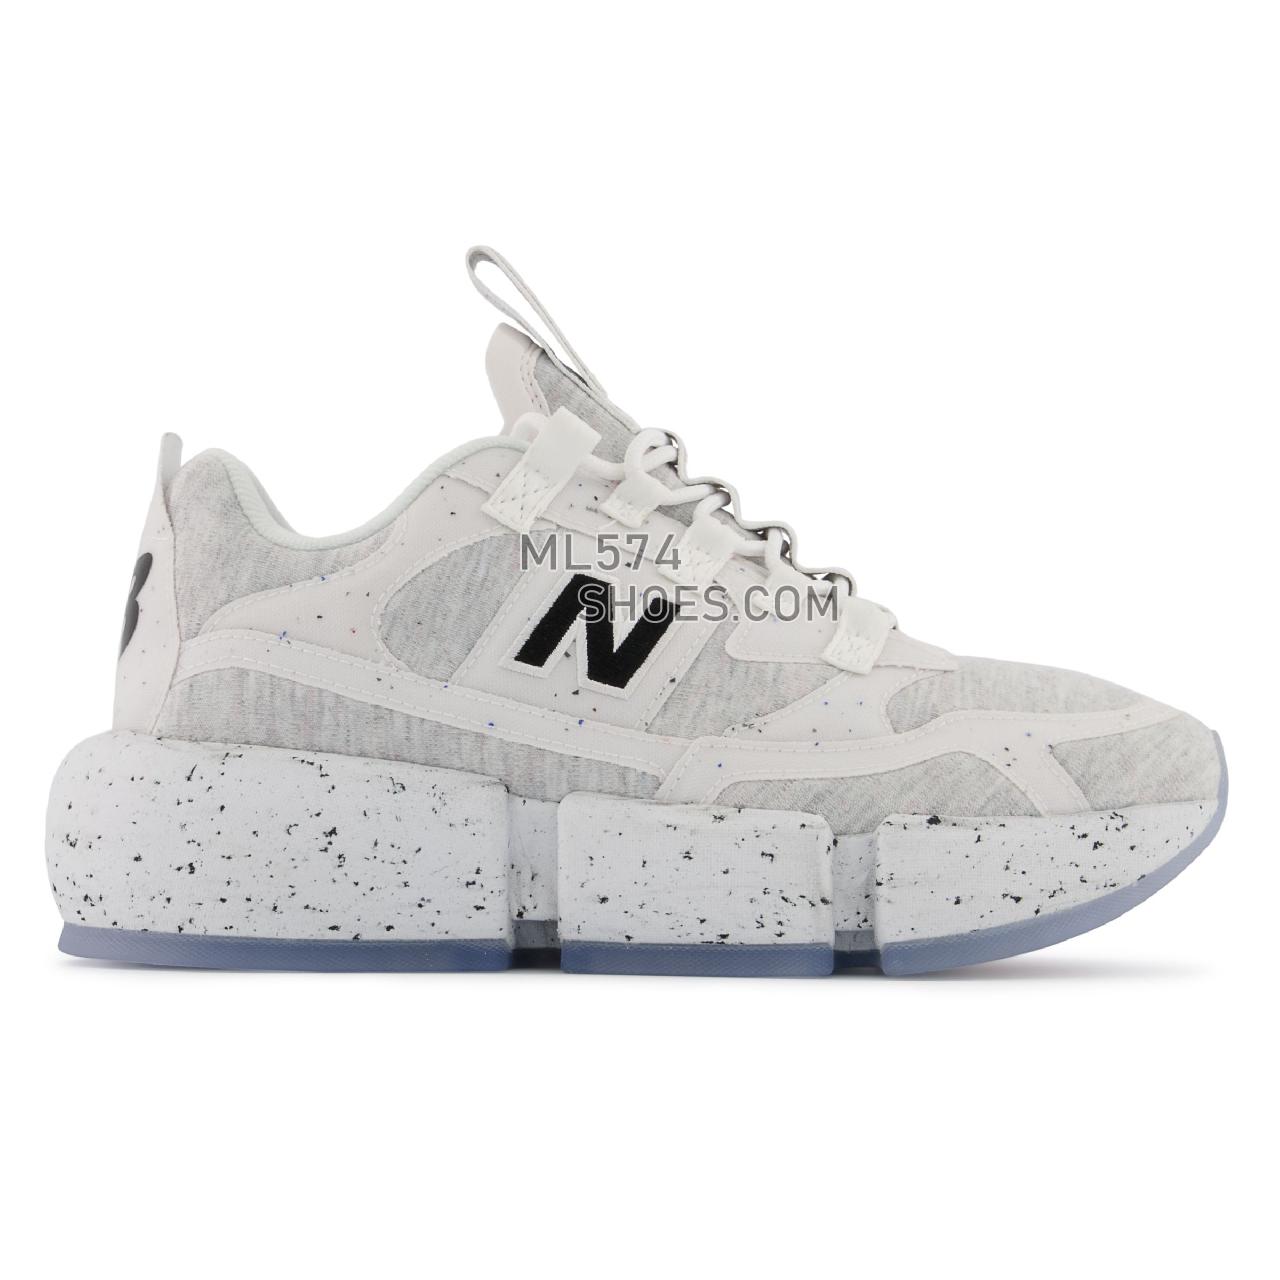 New Balance Vision Racer ReWorked - Unisex Men's Women's Sport Style Sneakers - Nb White with Peony and Black - MSVRCRGA